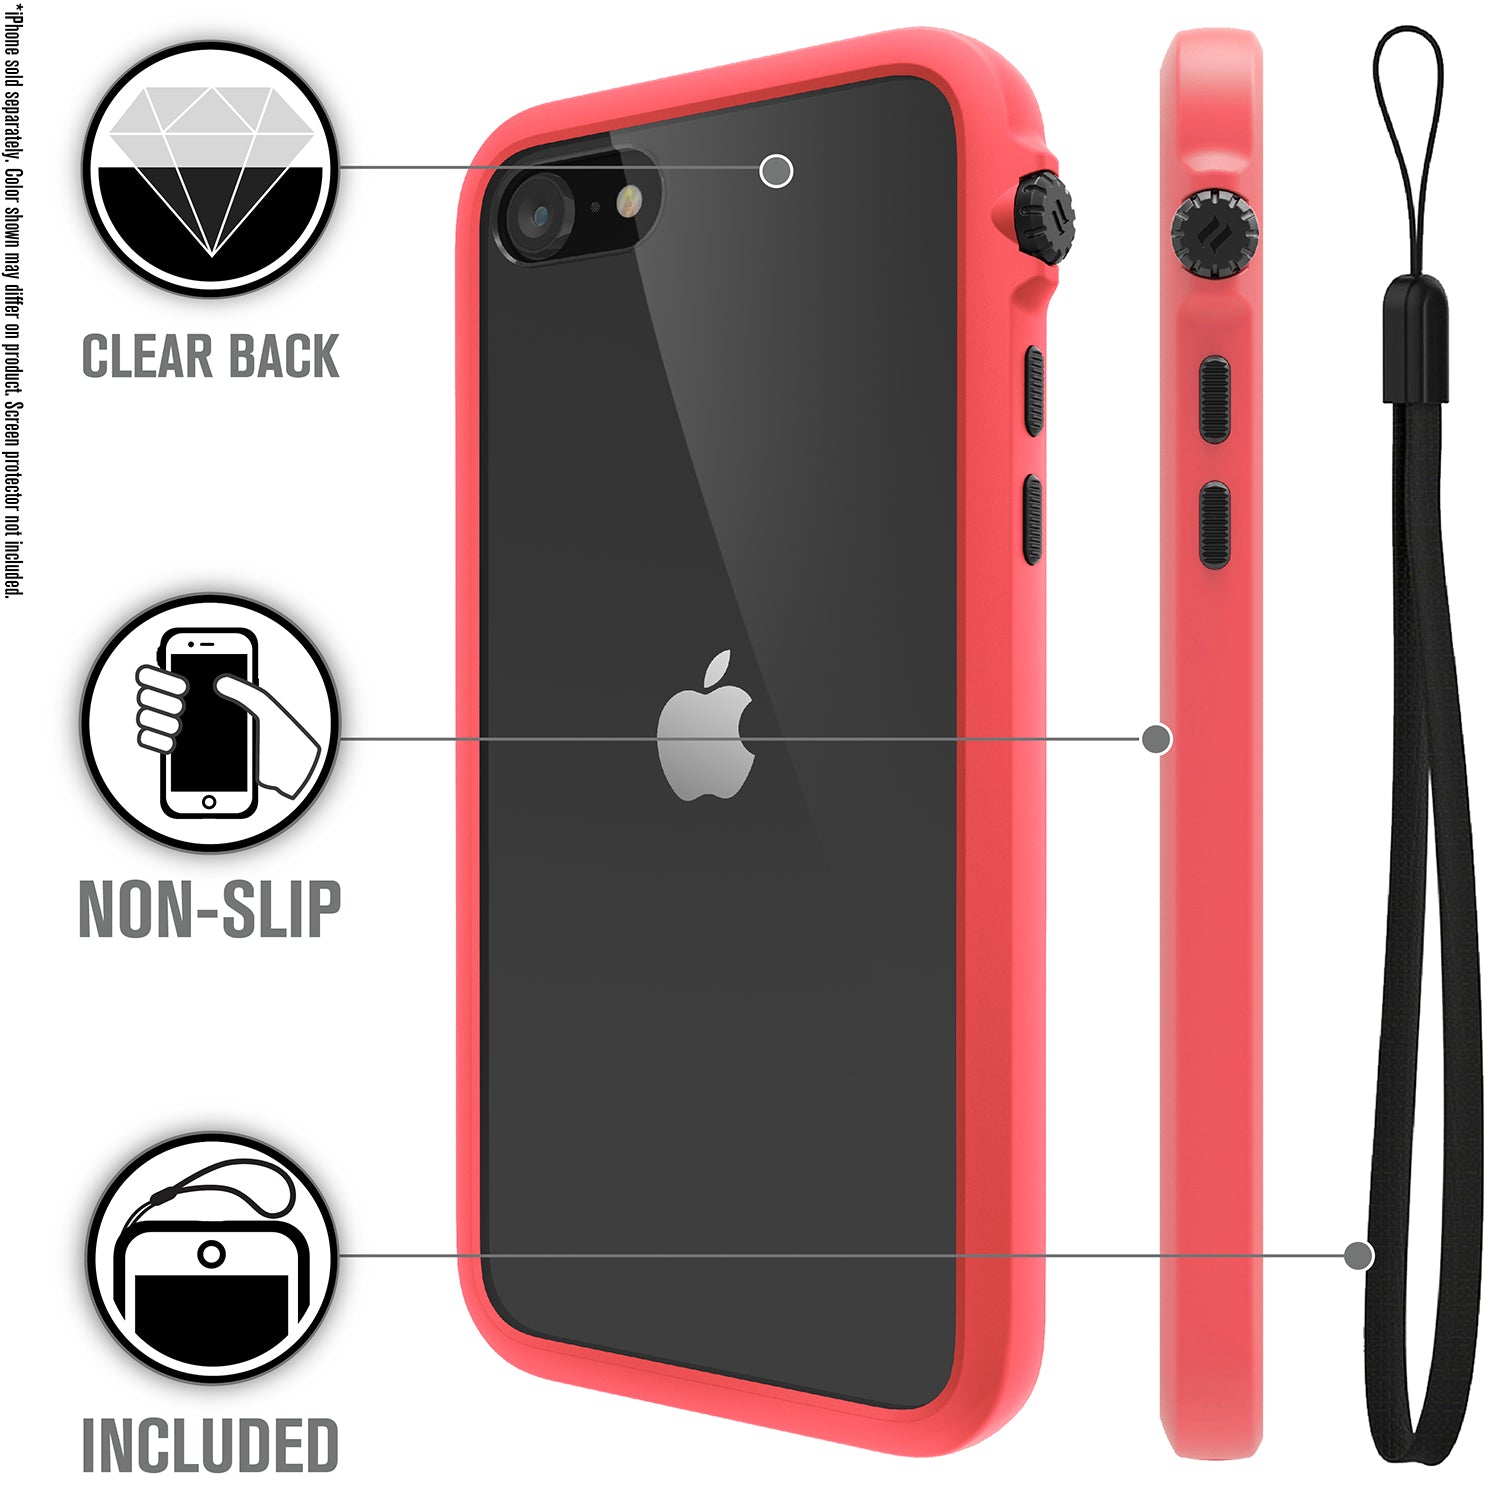 Catalyst iphone 8/7 impact protection case showing the case features with lanyard in a coral colorway text reads clear back non-slip included